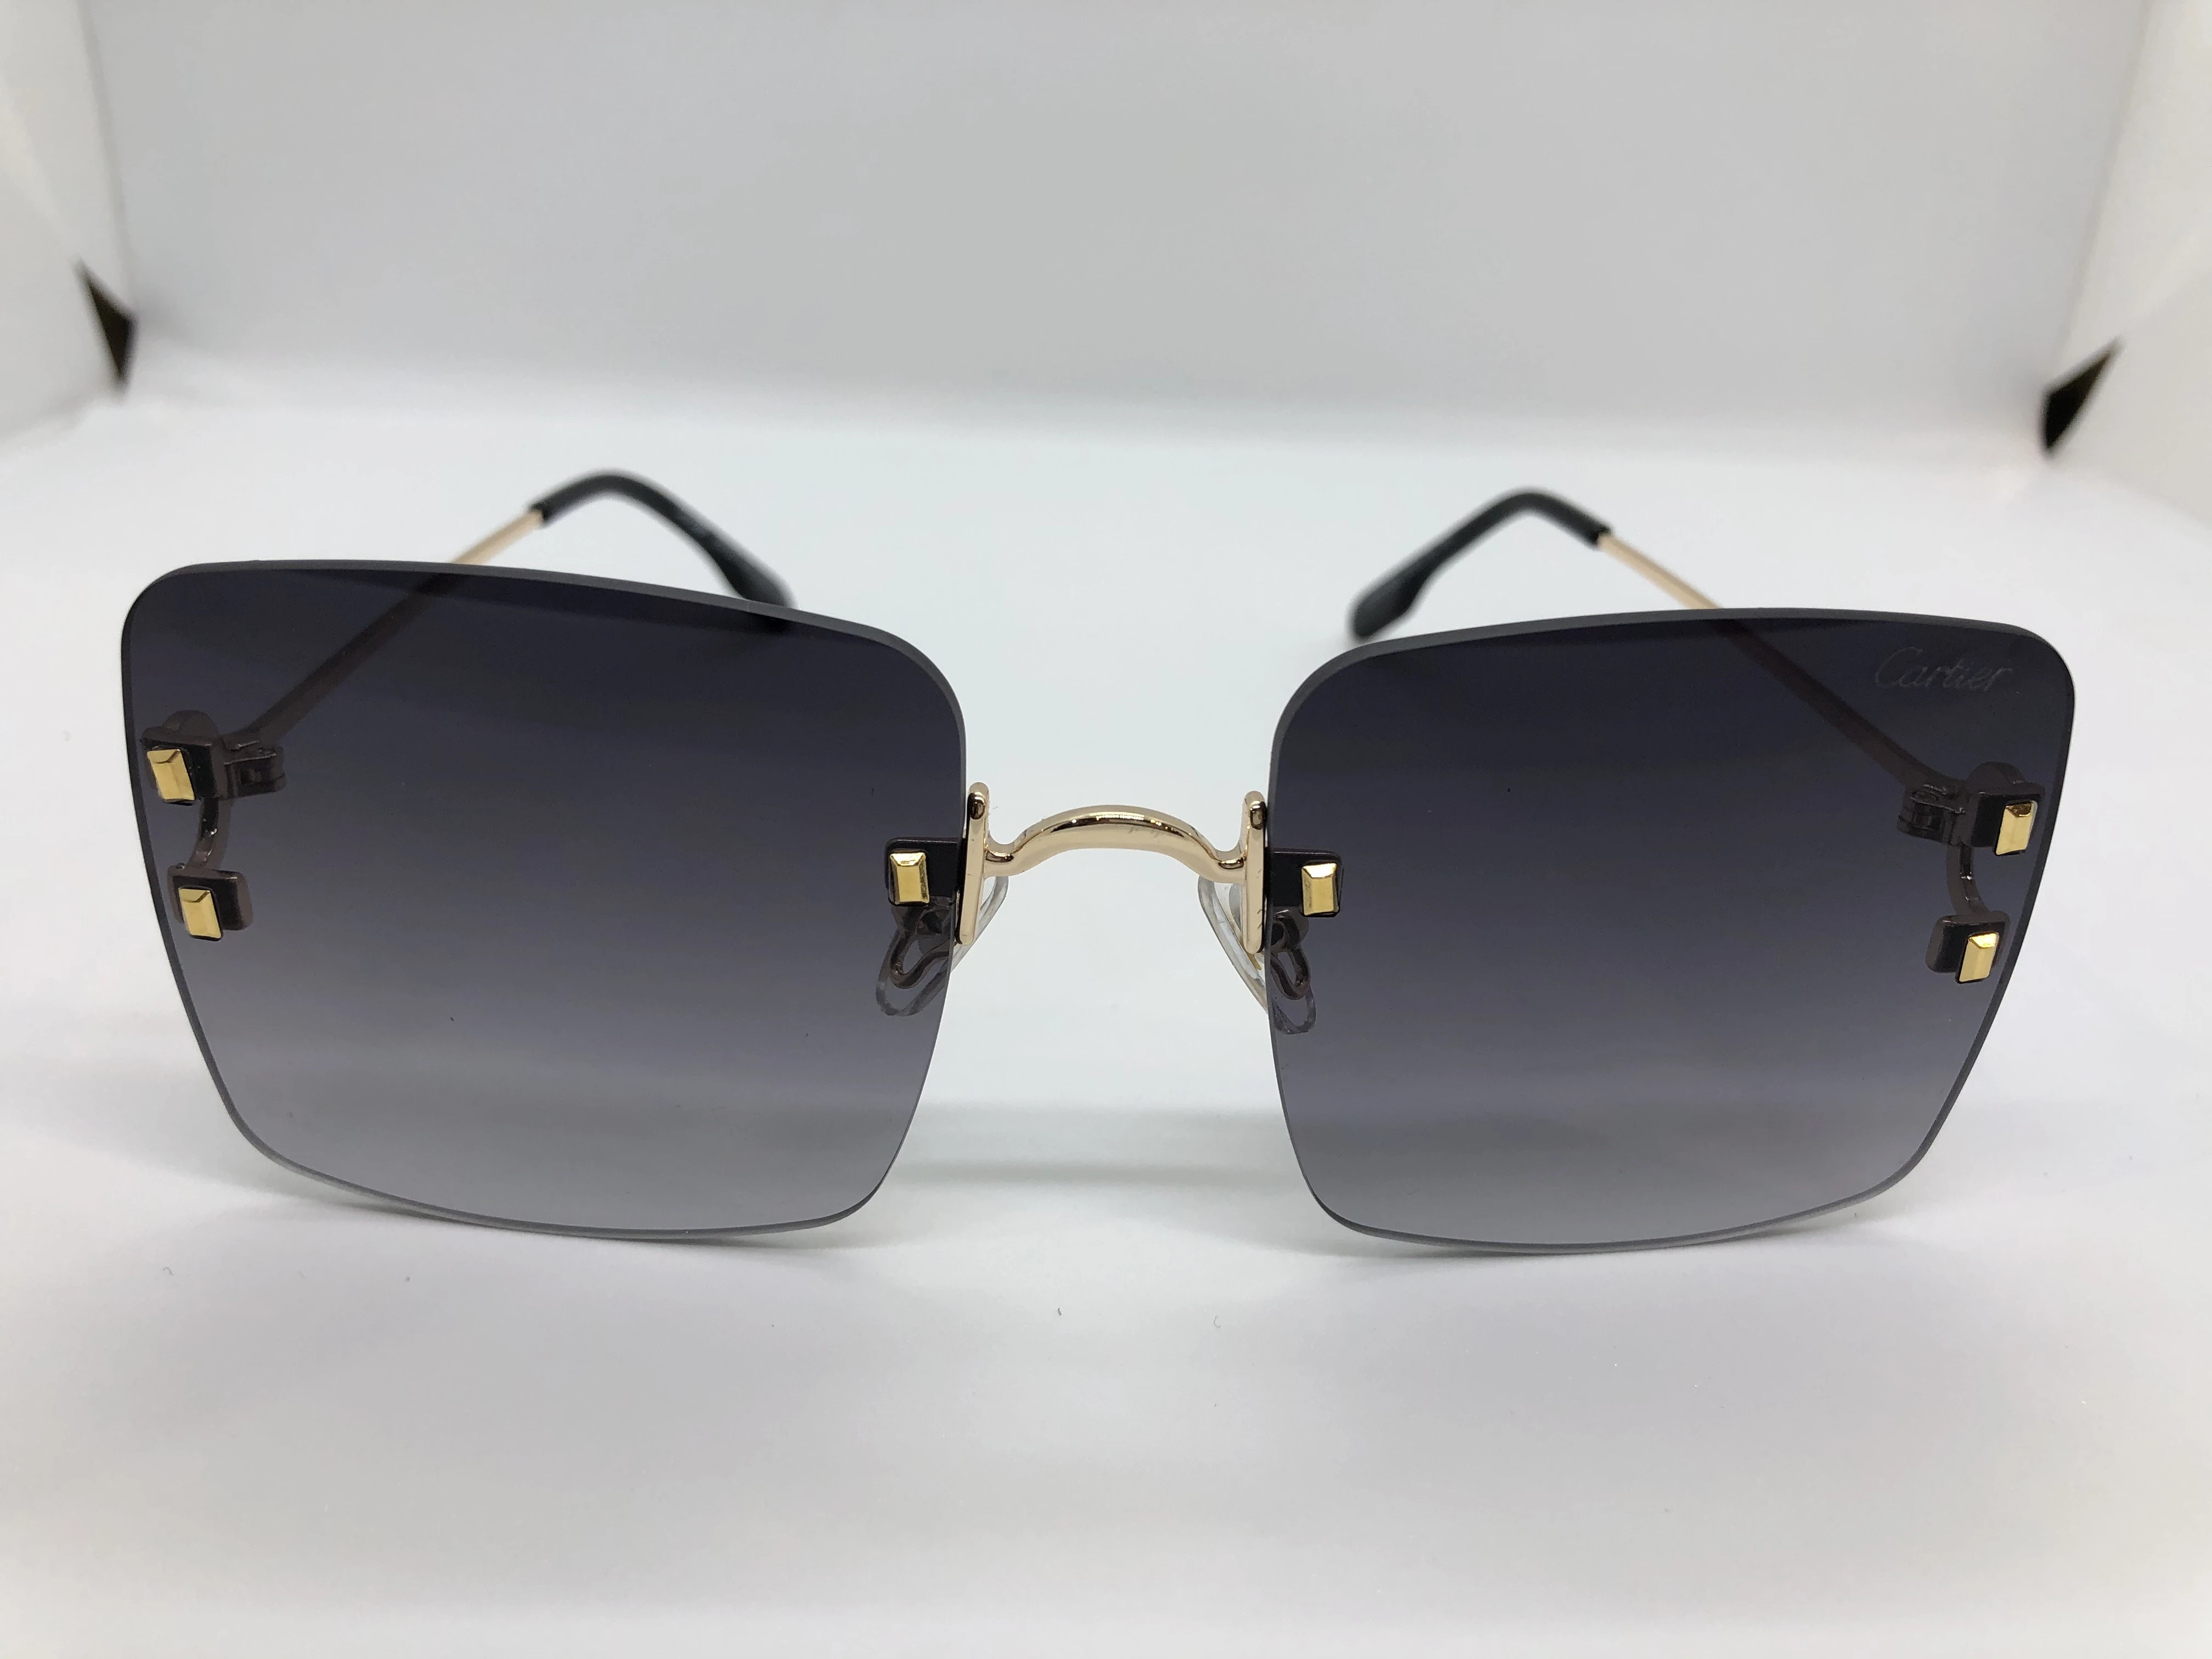 Cartier sunglasses - without frame - black gradient lenses - and golden metal arm - for women